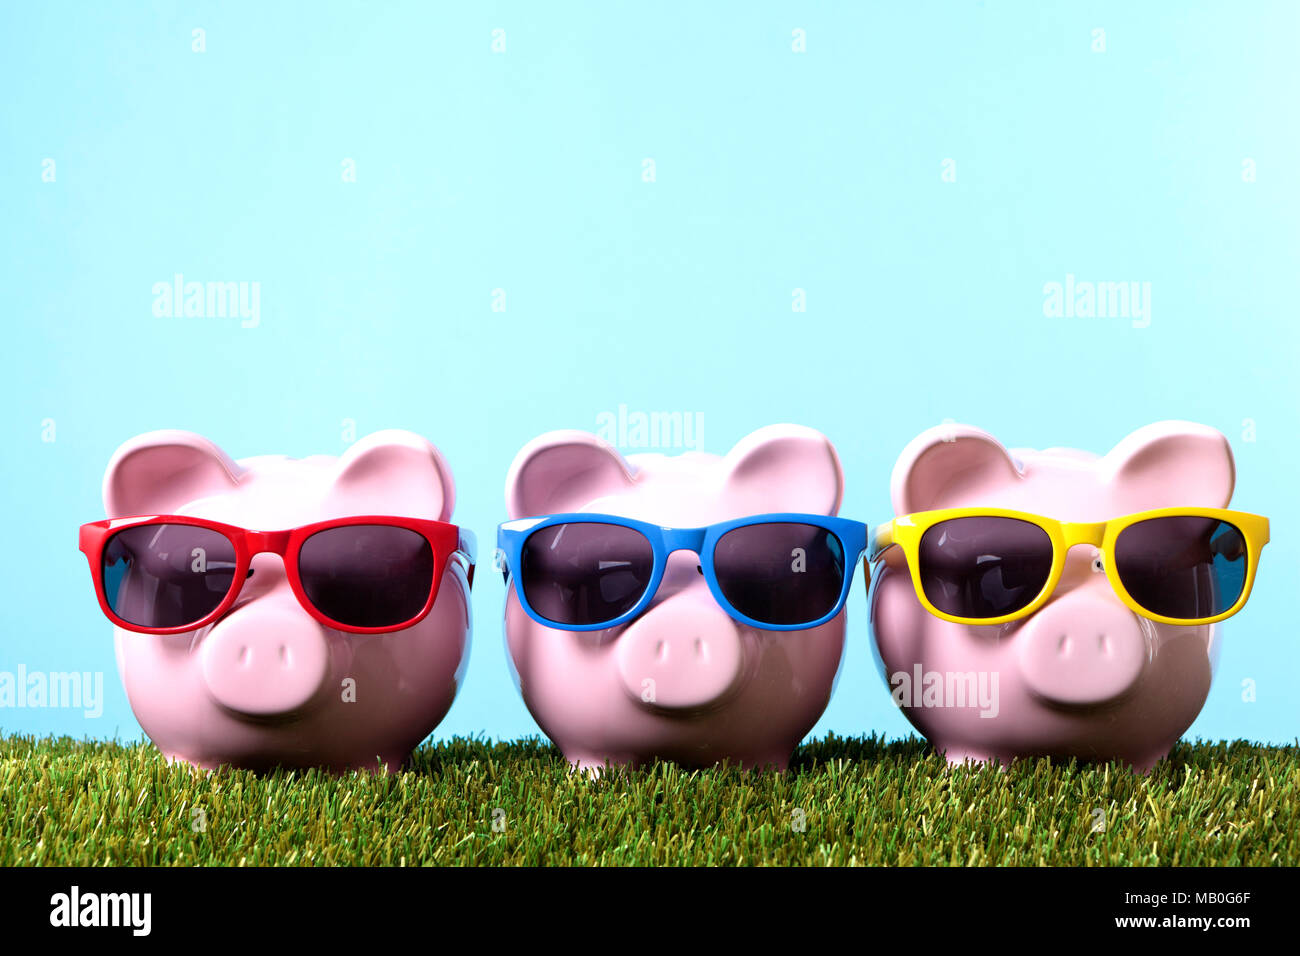 Three pink piggy banks with sunglasses on grass with blue sky.  Studio shot with plain blue background. Stock Photo